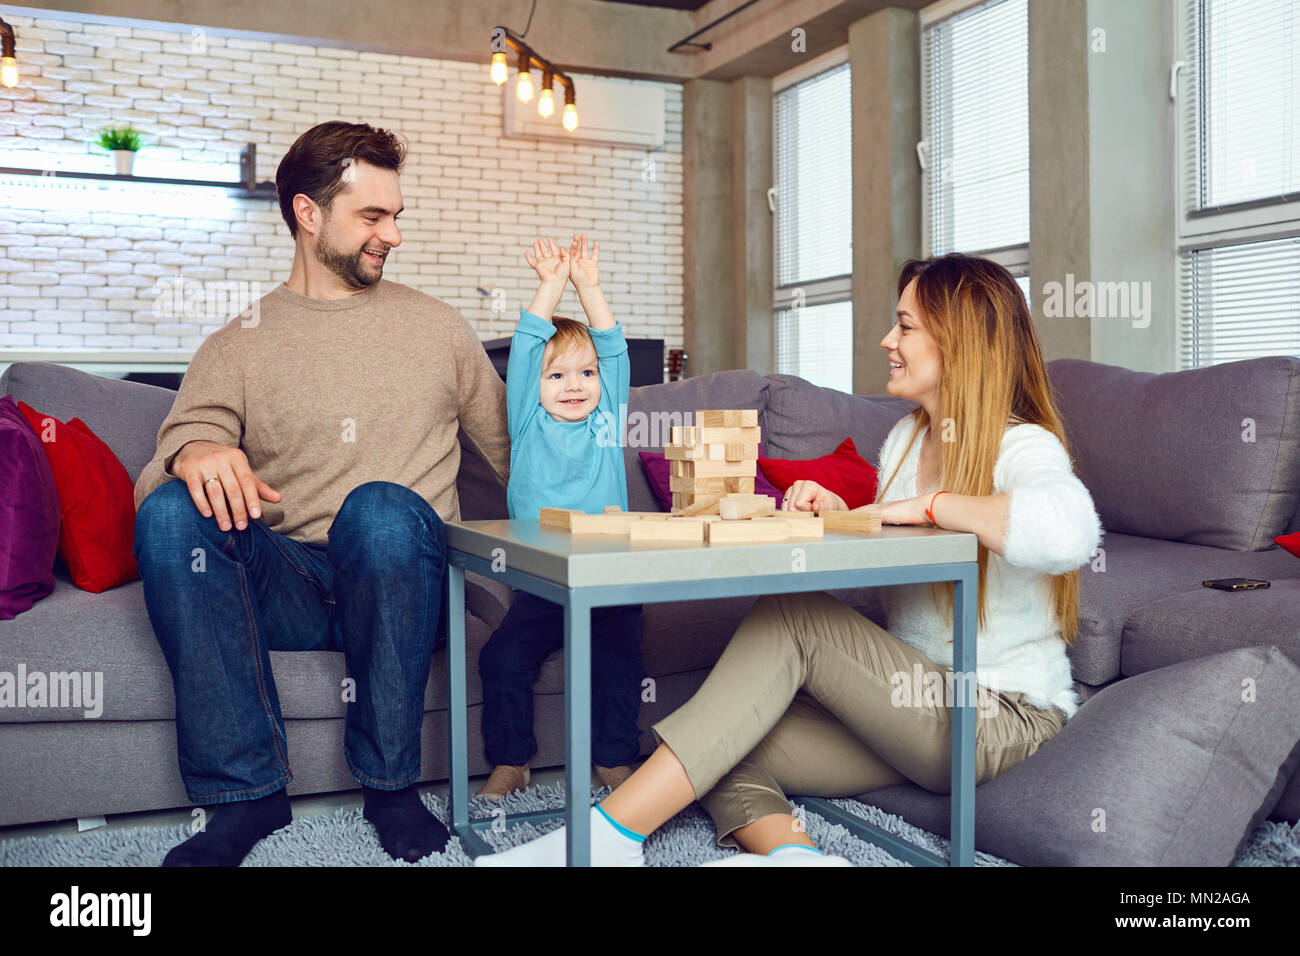 The family plays board games in the room. Stock Photo